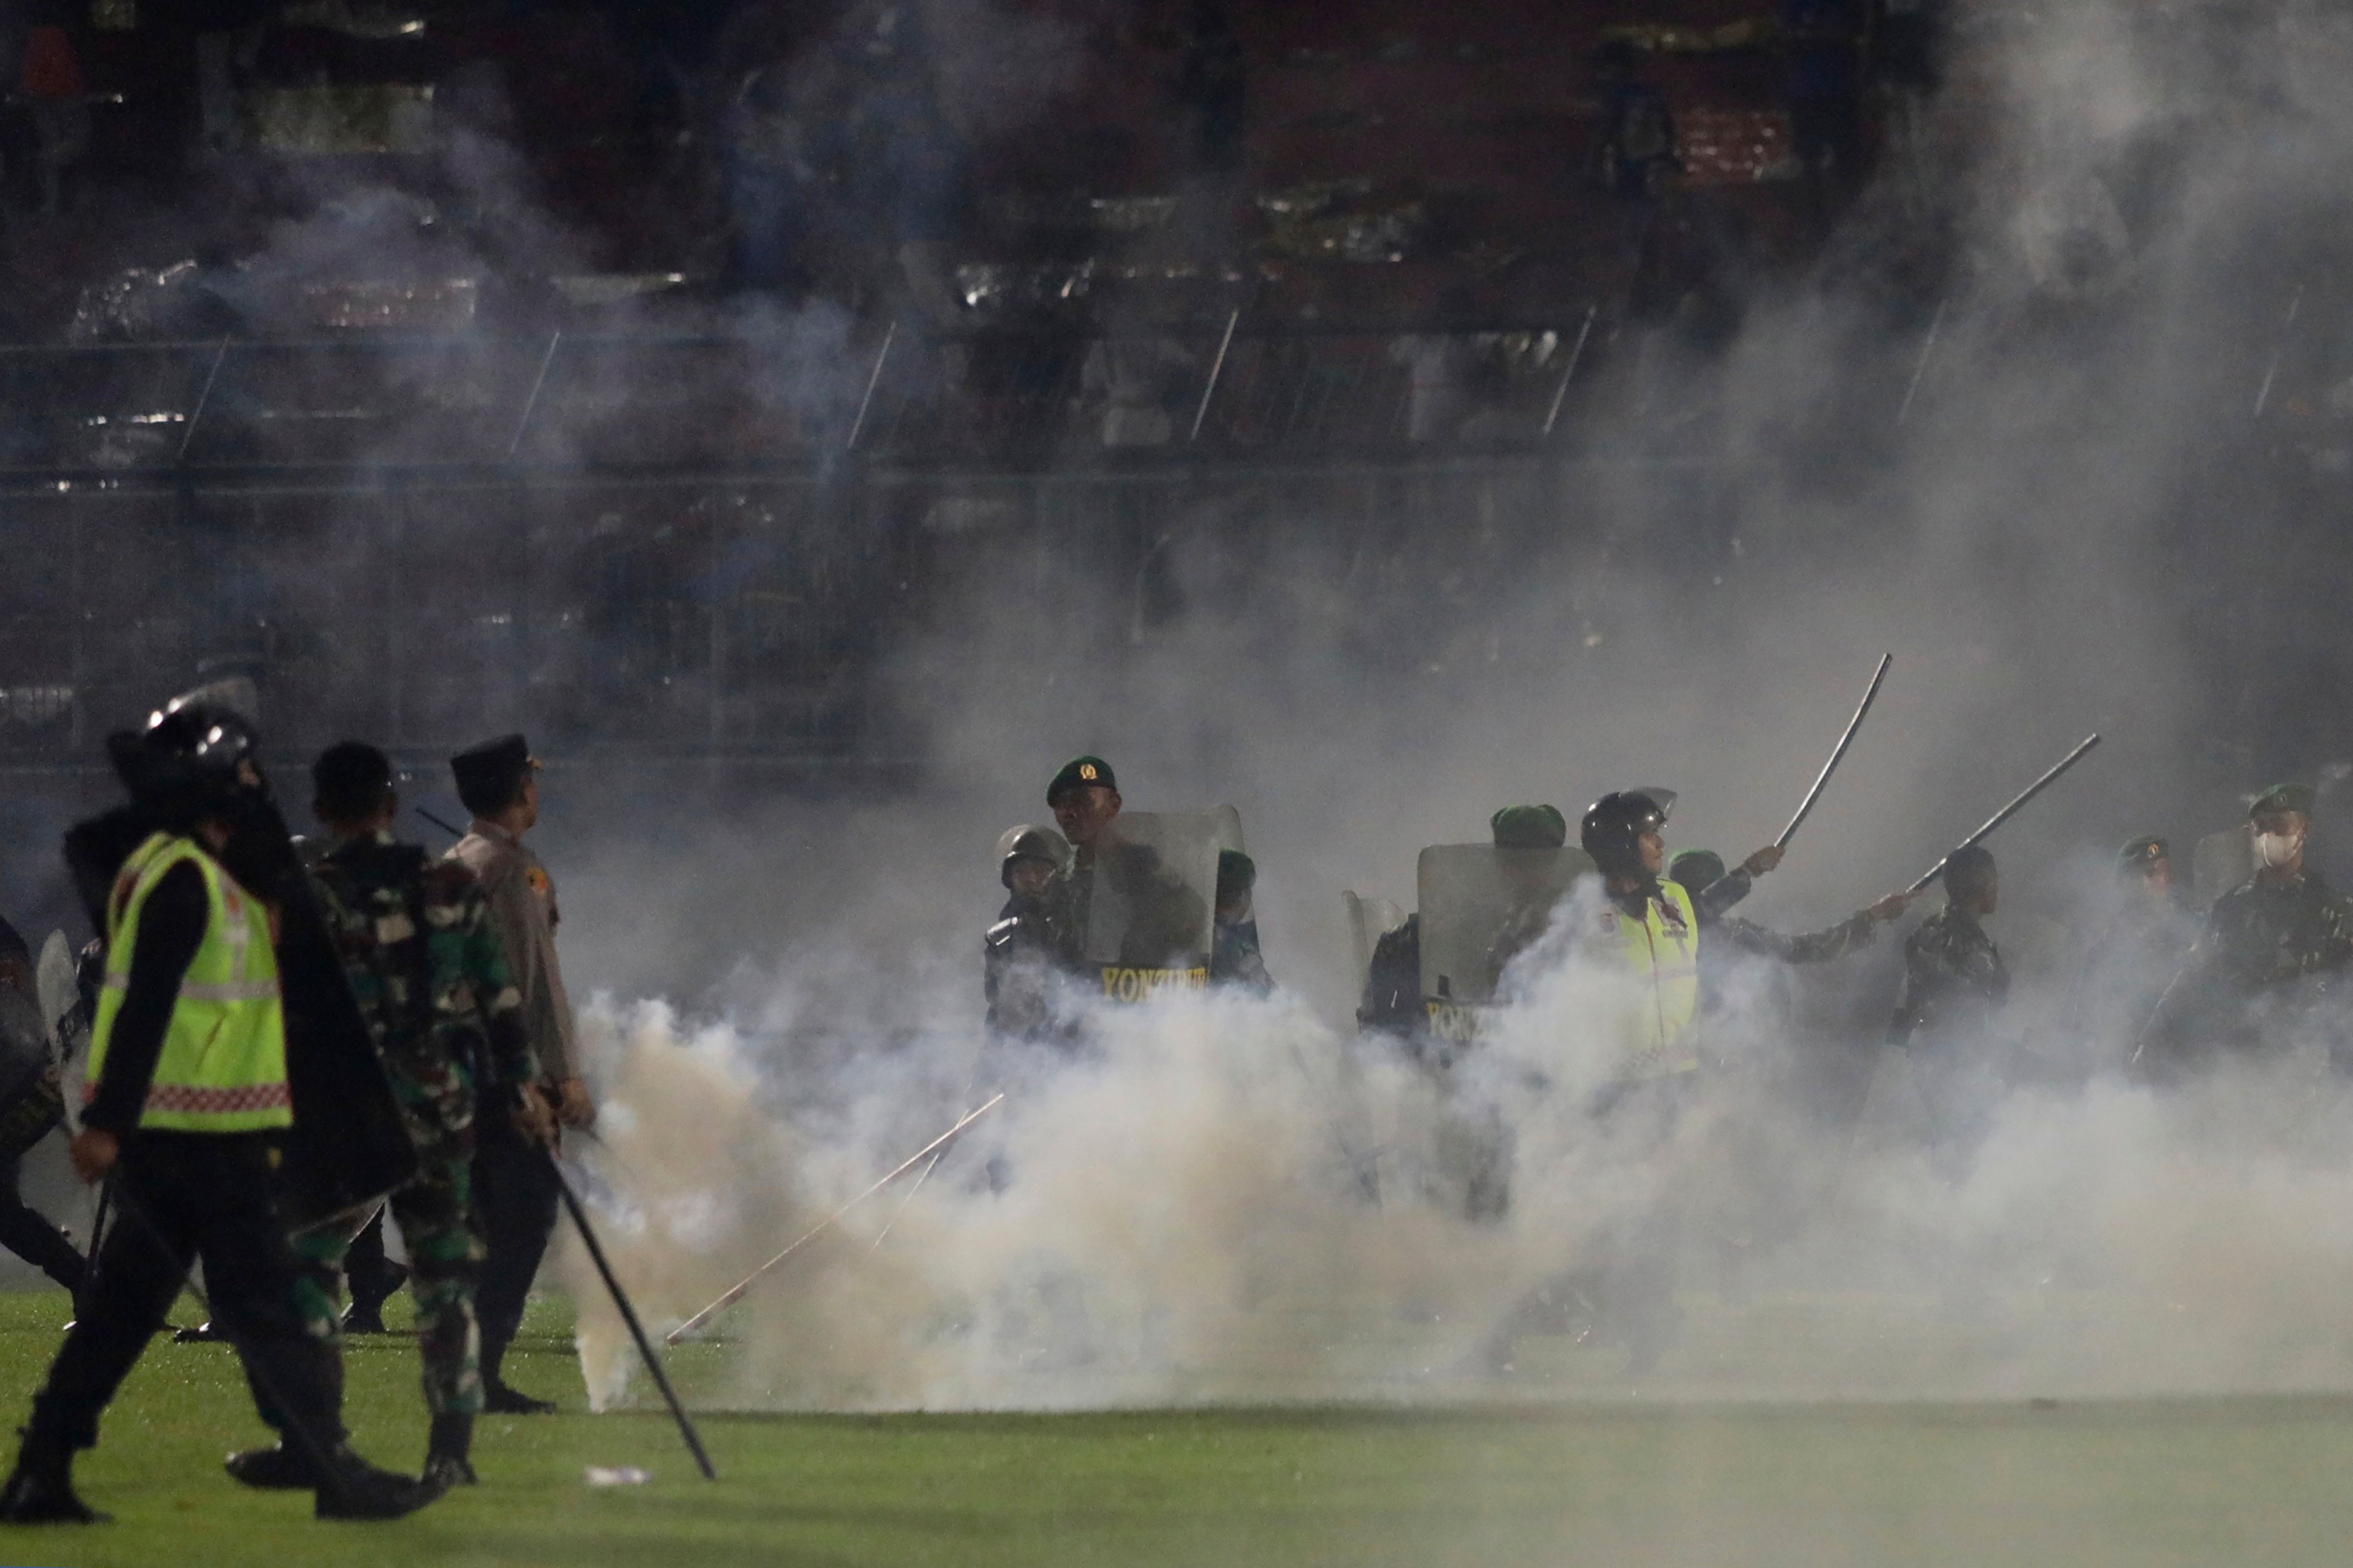 Police officers and soldiers stand amid tear gas smoke after clashes between fans during a soccer match at Kanjuruhan Stadium in Malang, East Java, Indonesia, Saturday, Oct. 1, 2022. (Yudha Prabowo—AP)